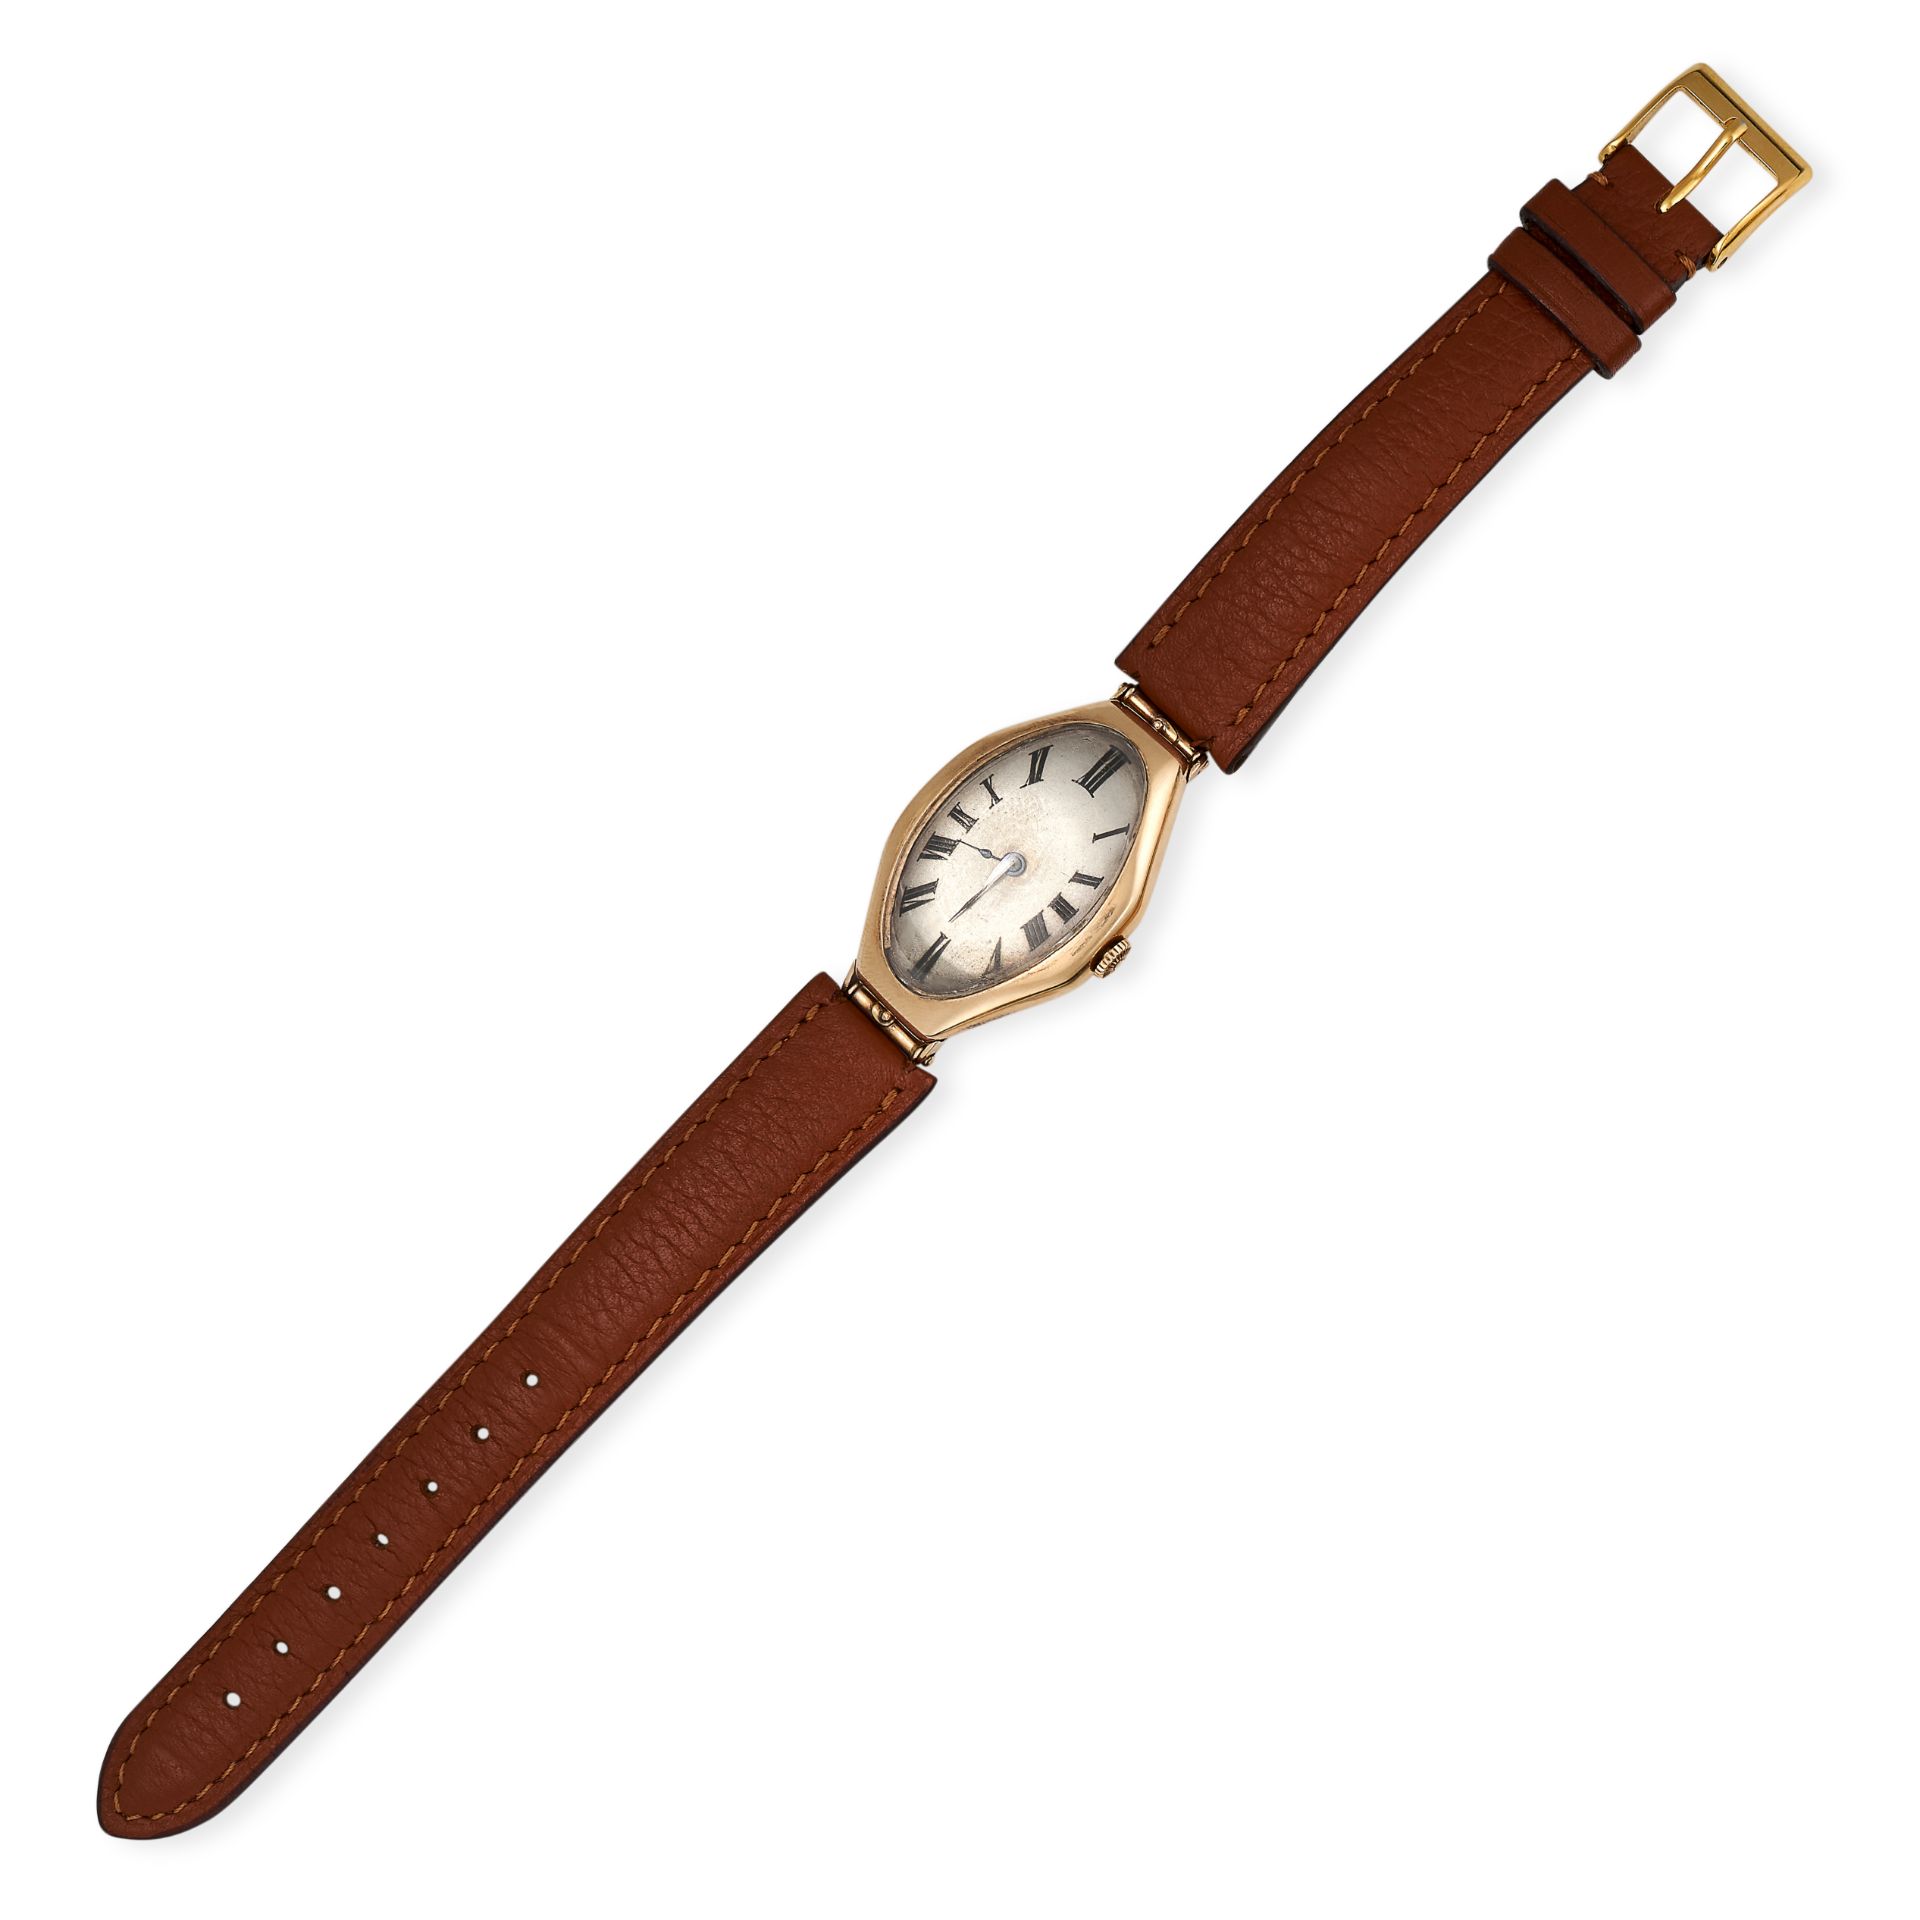 PATEK PHILIPPE, A TONNEAU SHAPED ANTIQUE WRISTWATCH, 1915-1920 in 14ct yellow gold, white face